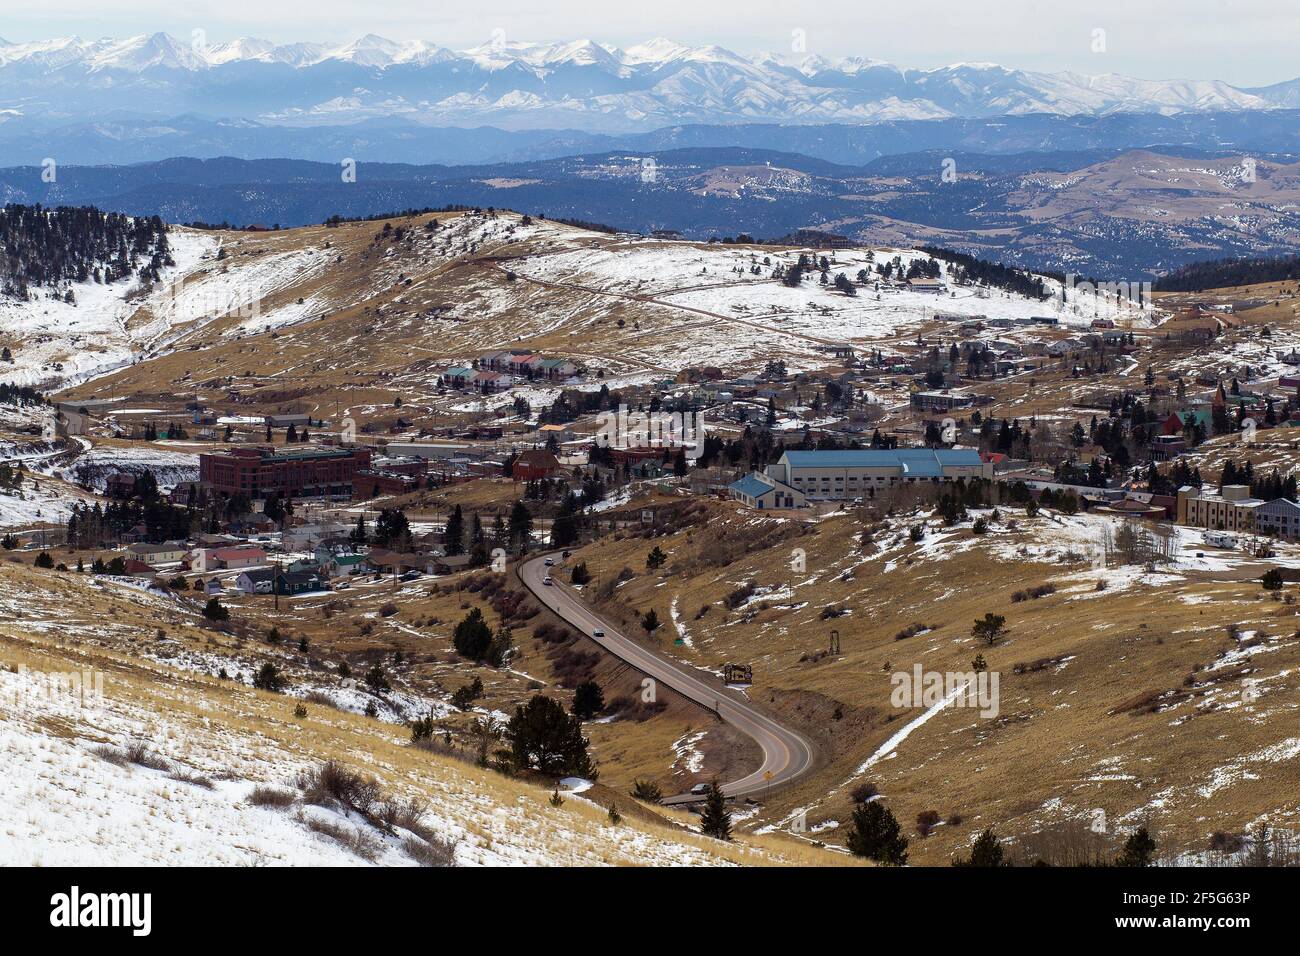 Cripple Creek Colorado a tourist town with many casinos was the site of the greatest mining boom in Colorado. Stock Photo